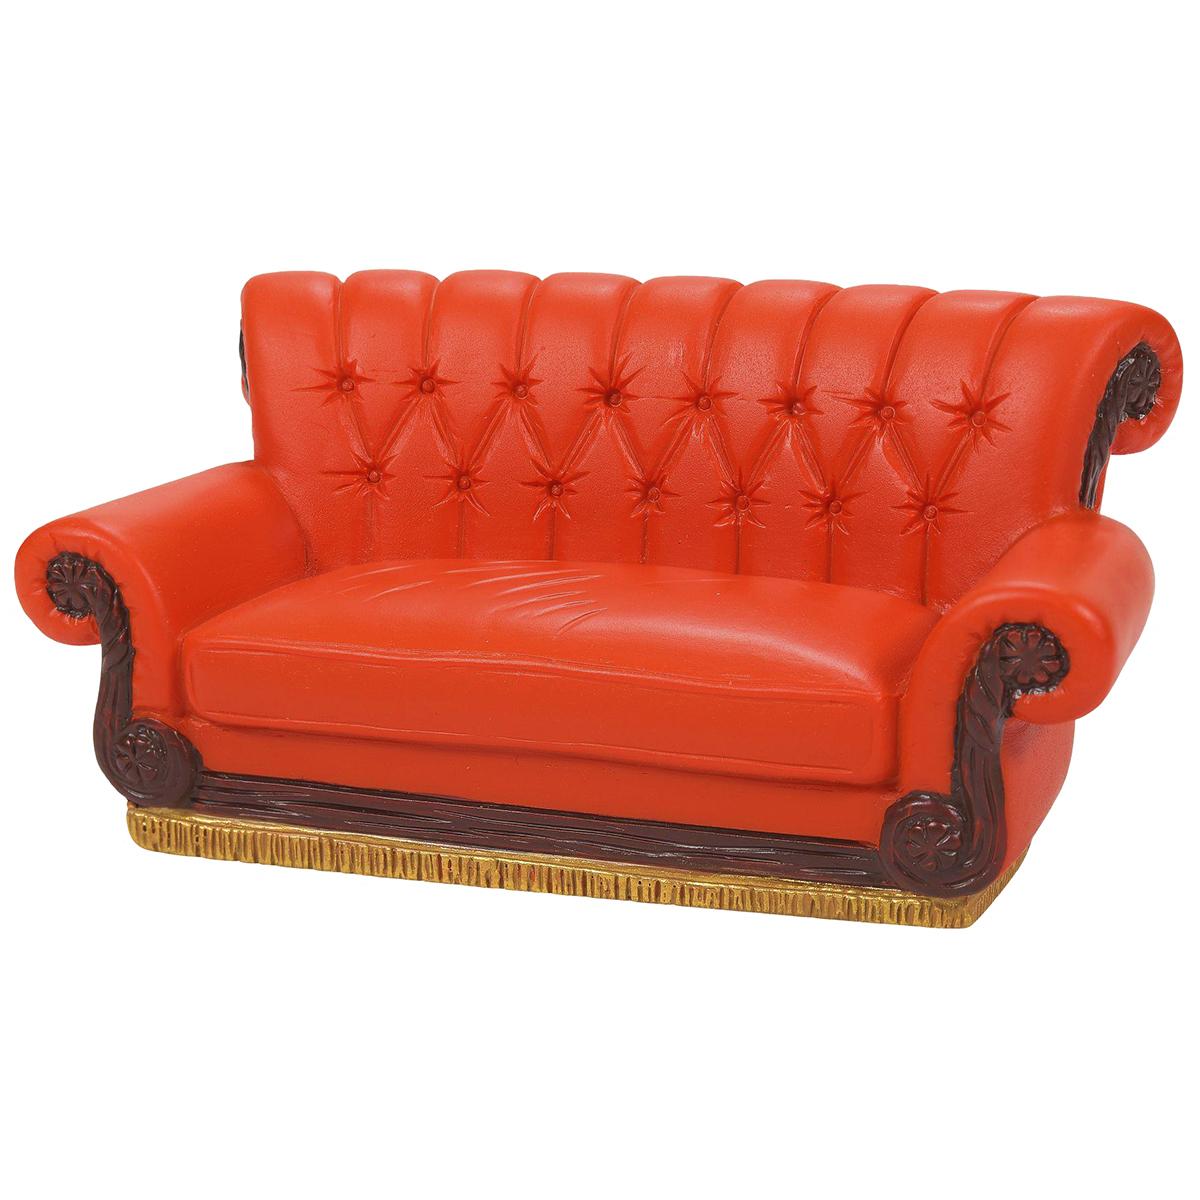 Central Perk Couch